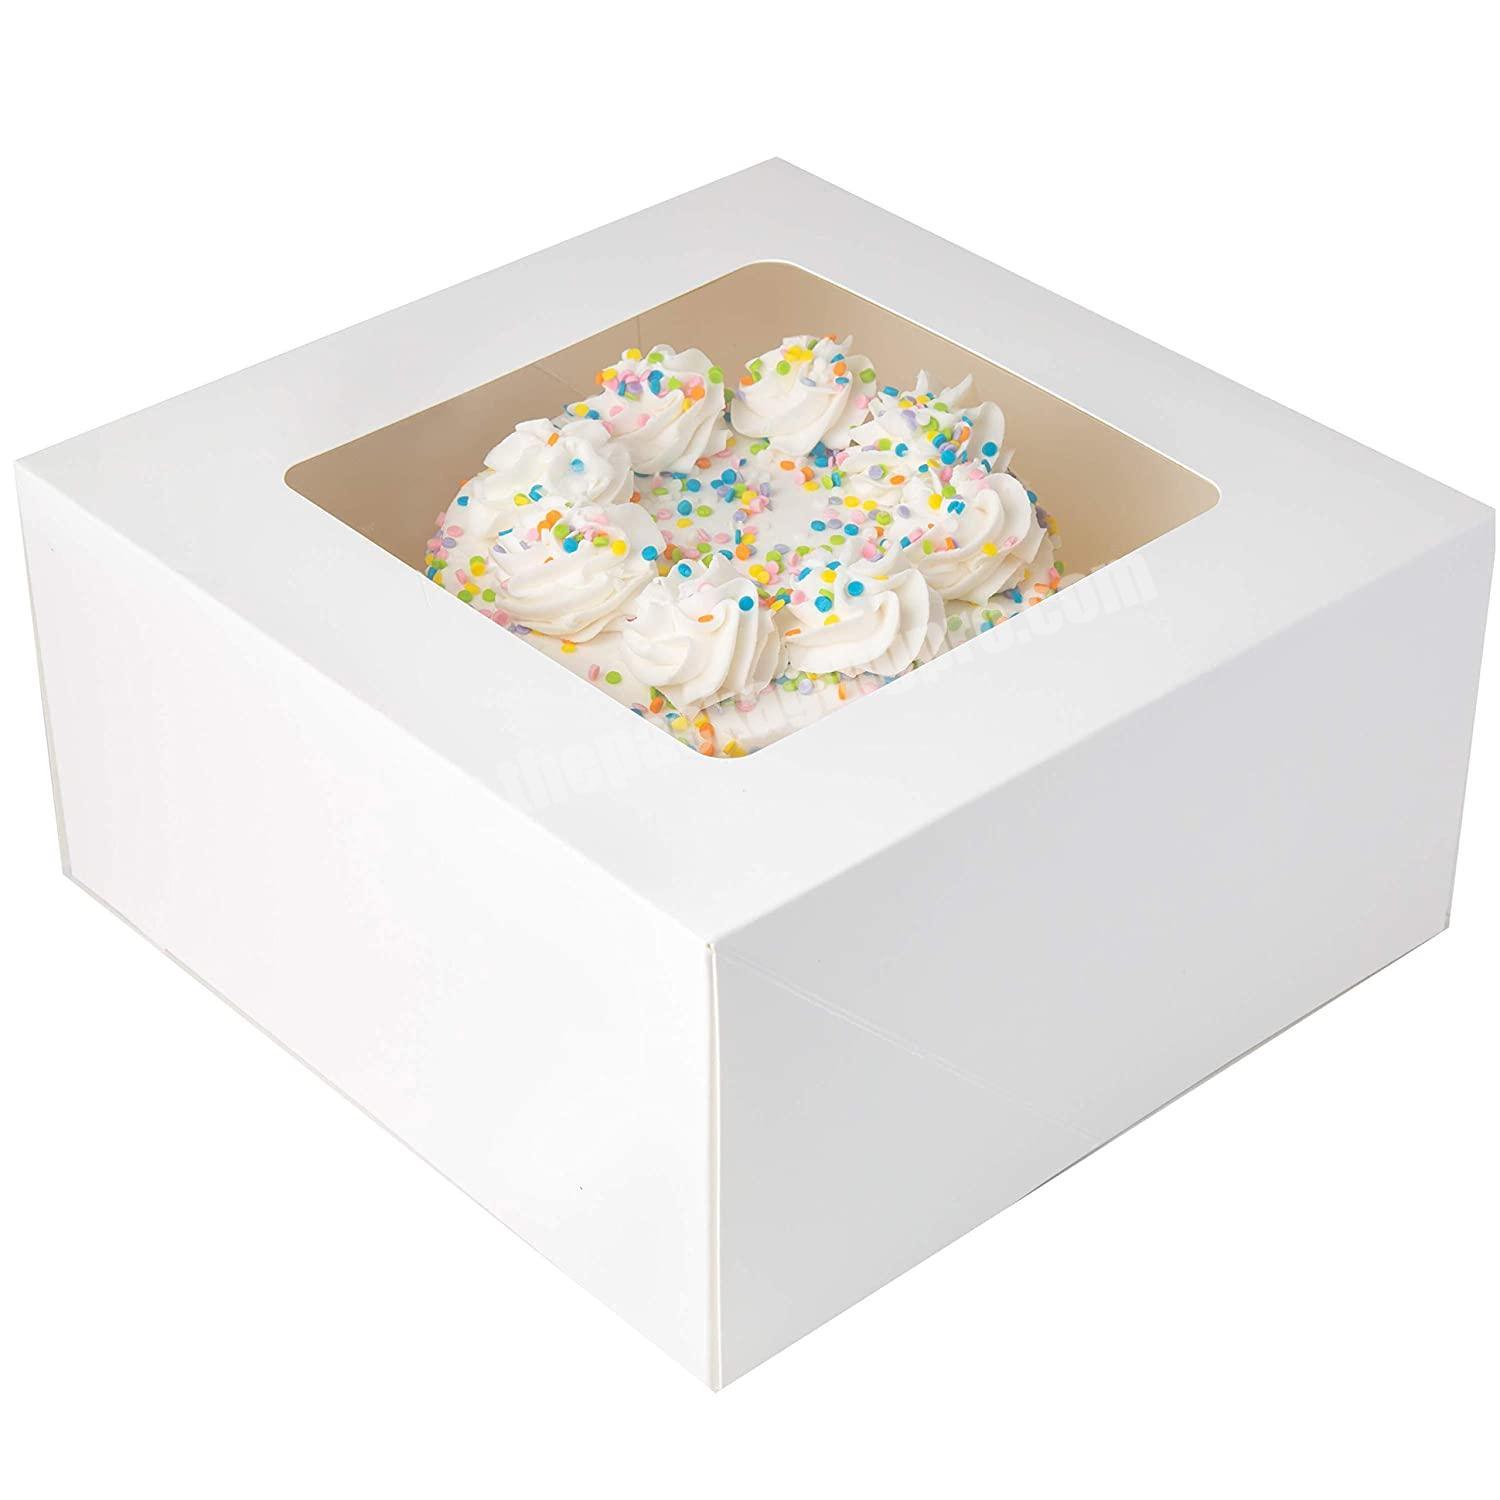 Custom White small 10x10x5 Cake Box Container Bakery Gift & Delivery Packaging Cake Boxes with Clear Display Viewing Window